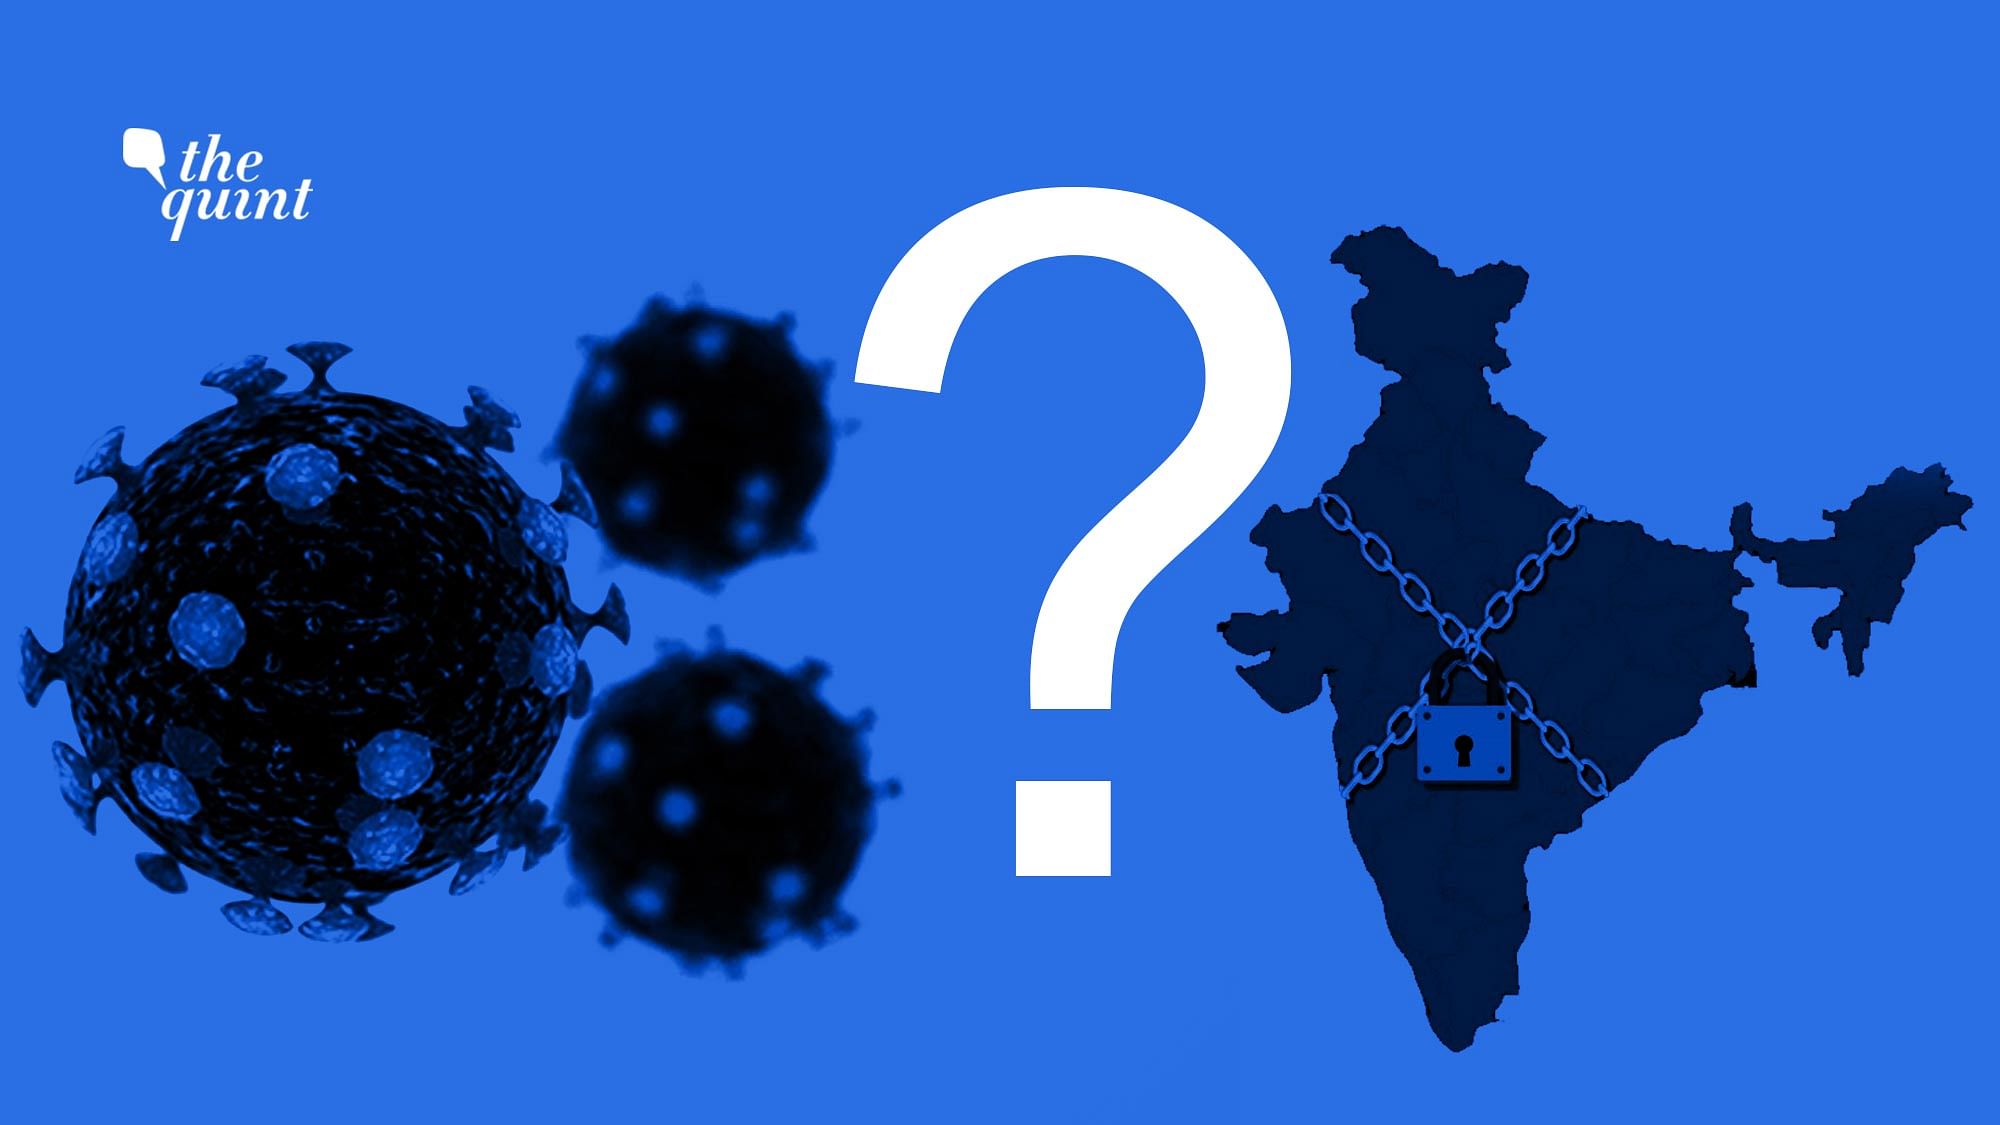 With India under a 21-day lockdown, we try to answer some of the big questions about this from a legal perspective.